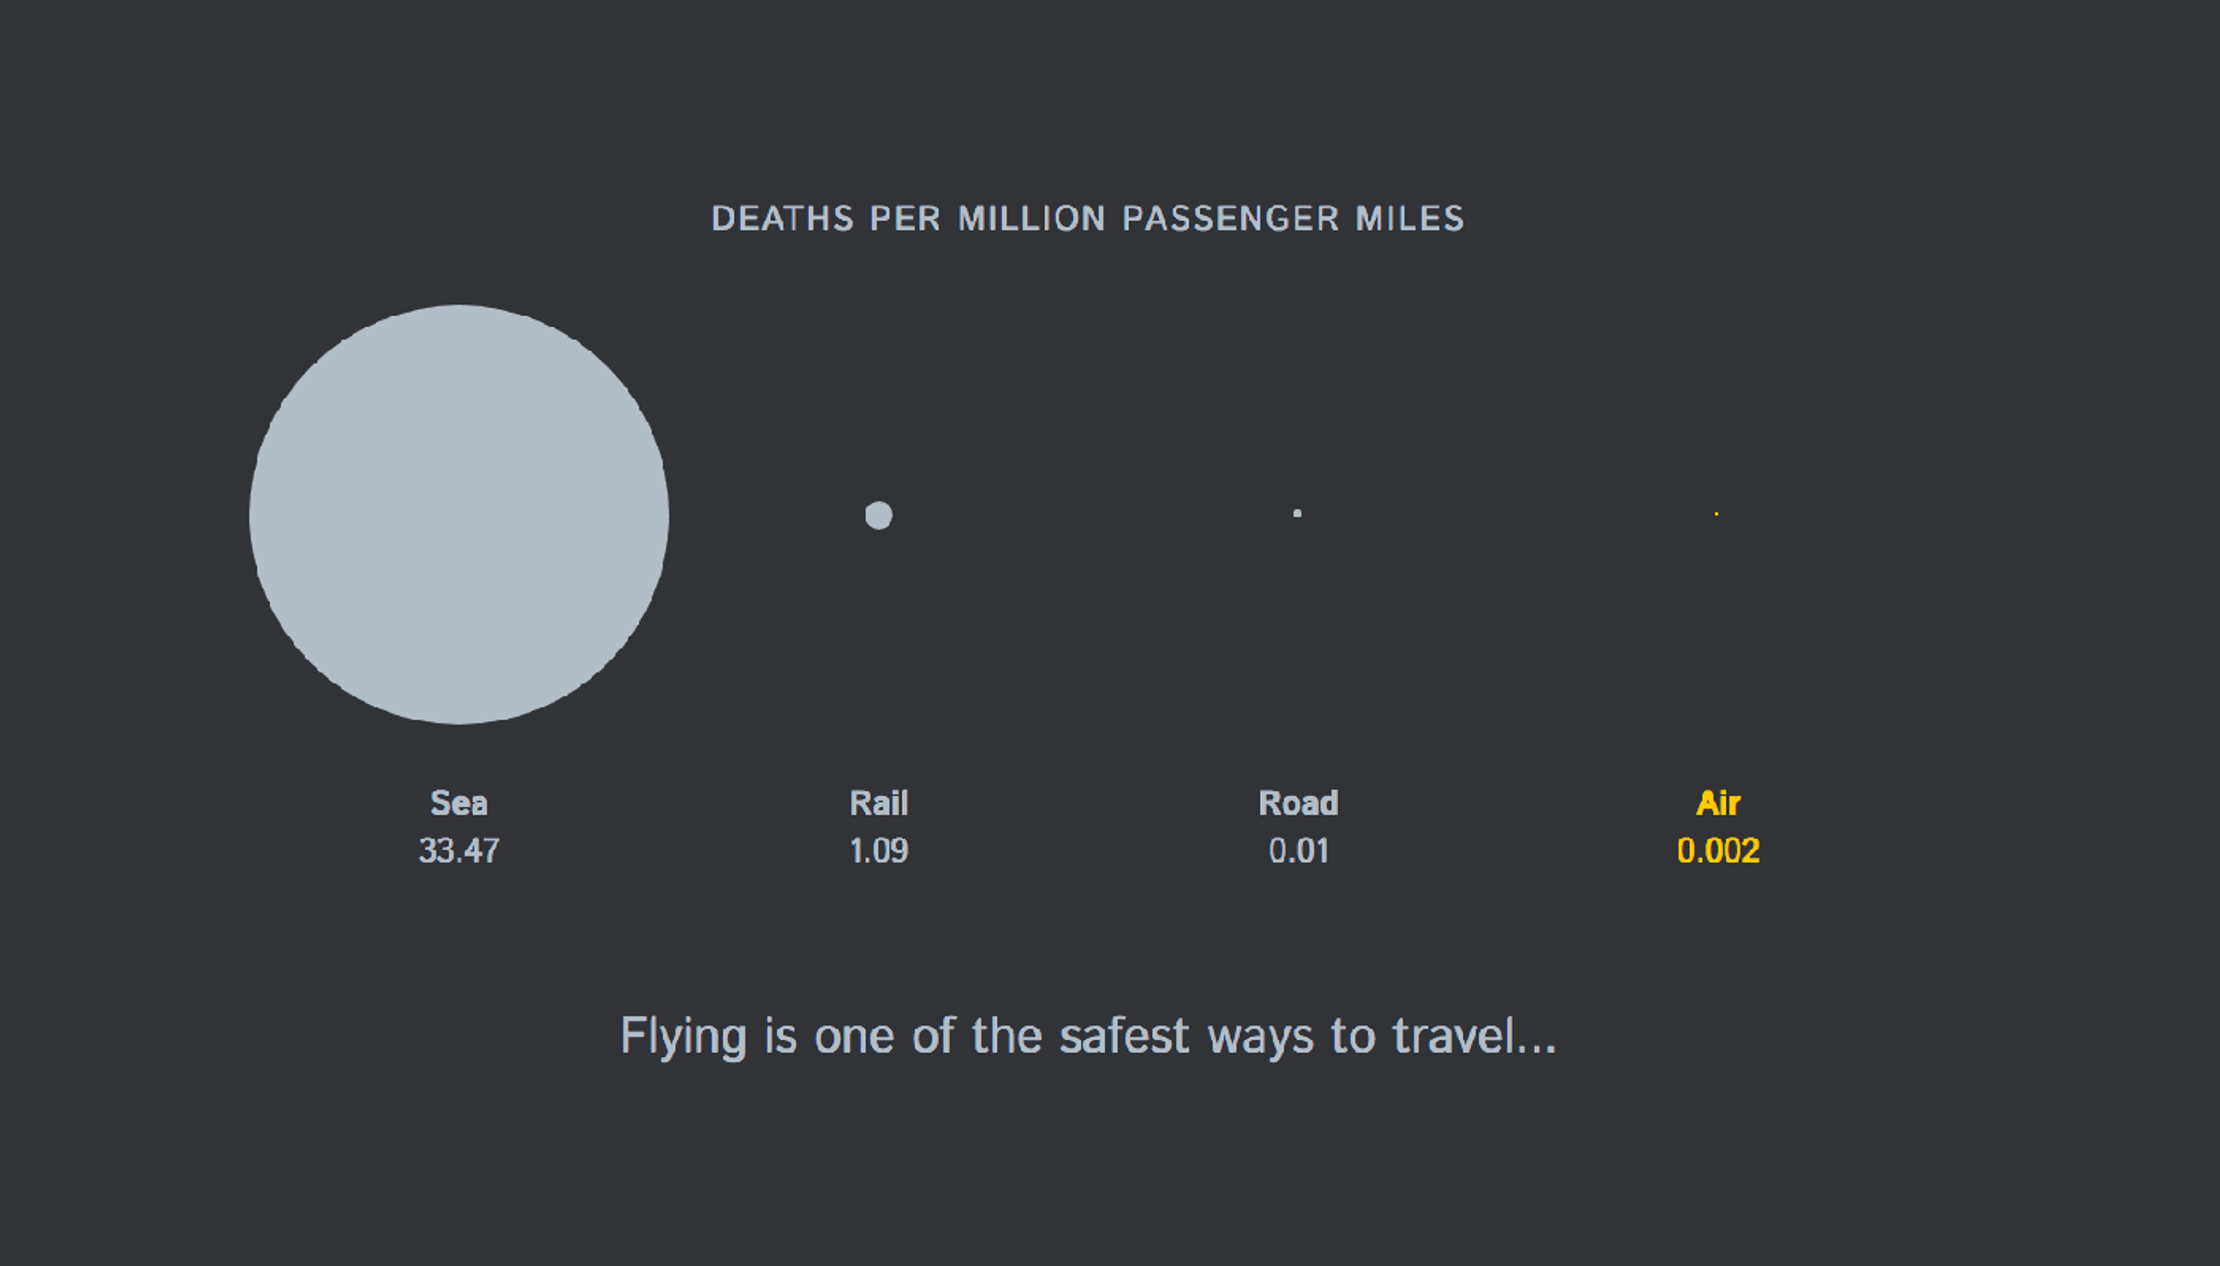 A proportional area chart showing the deaths per million passenger miles of different modes of transport. The least dangerous is is air at just 0.002 deaths. The most dangerous is sea with 33.47 deaths.